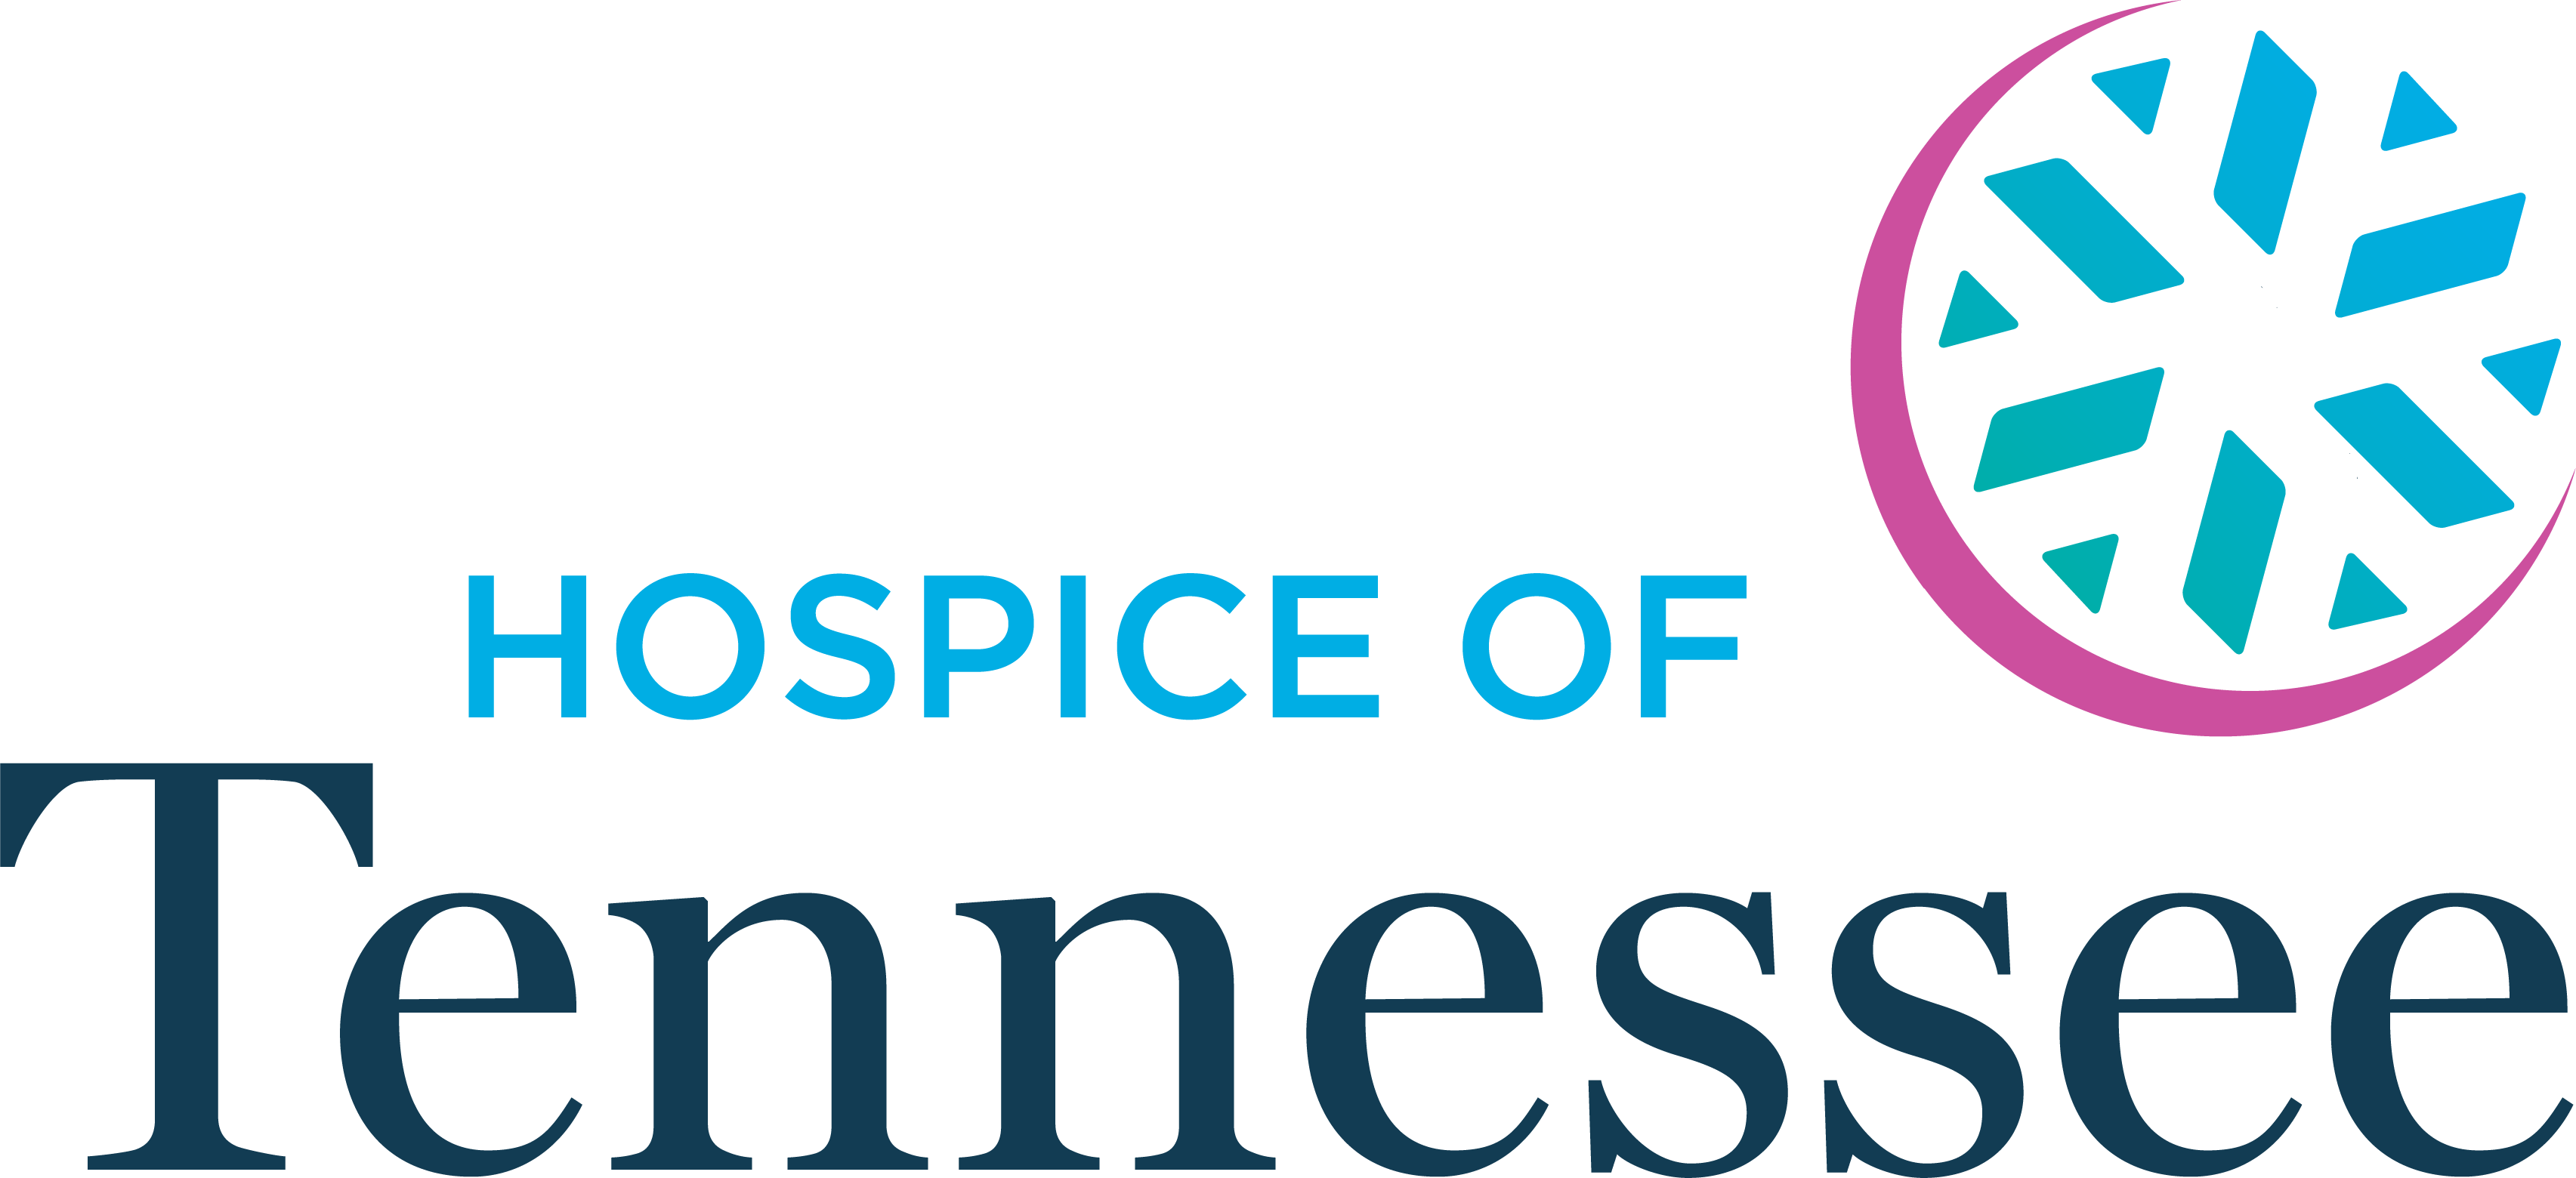 Hospice of Tennessee Logo